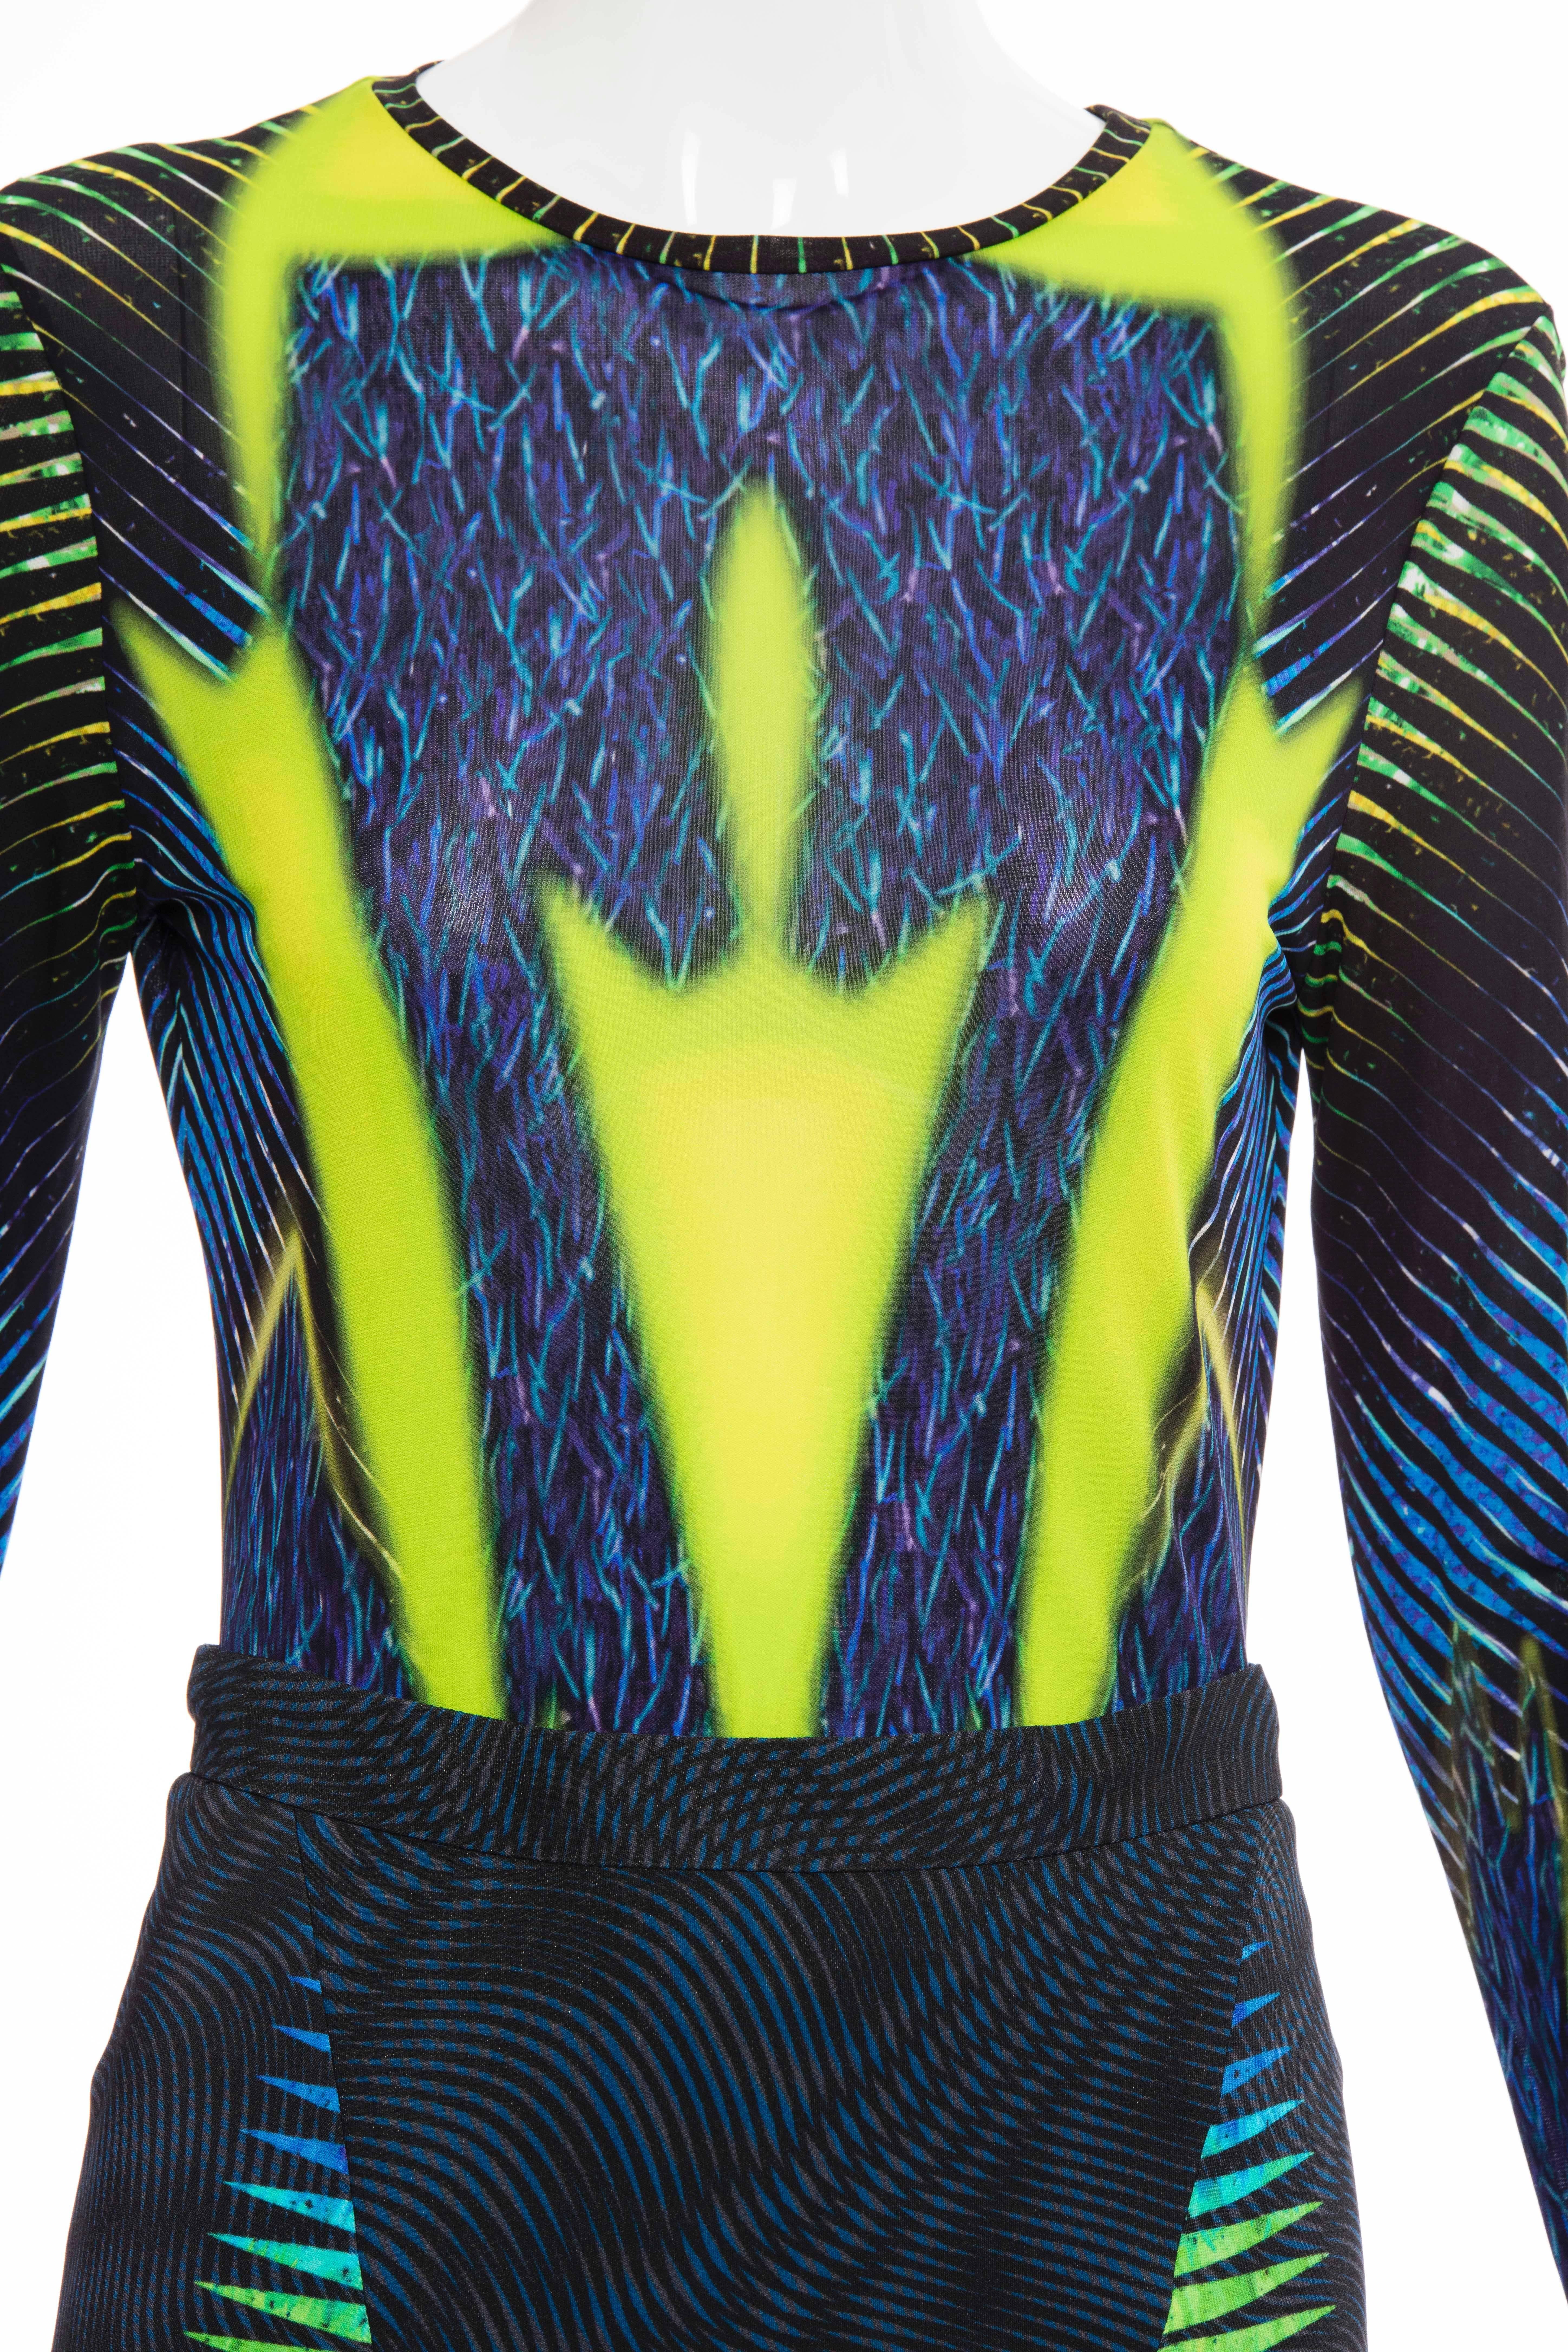 Women's Peter Pilotto Graphic Printed Skirt Suit, Fall 2012 For Sale